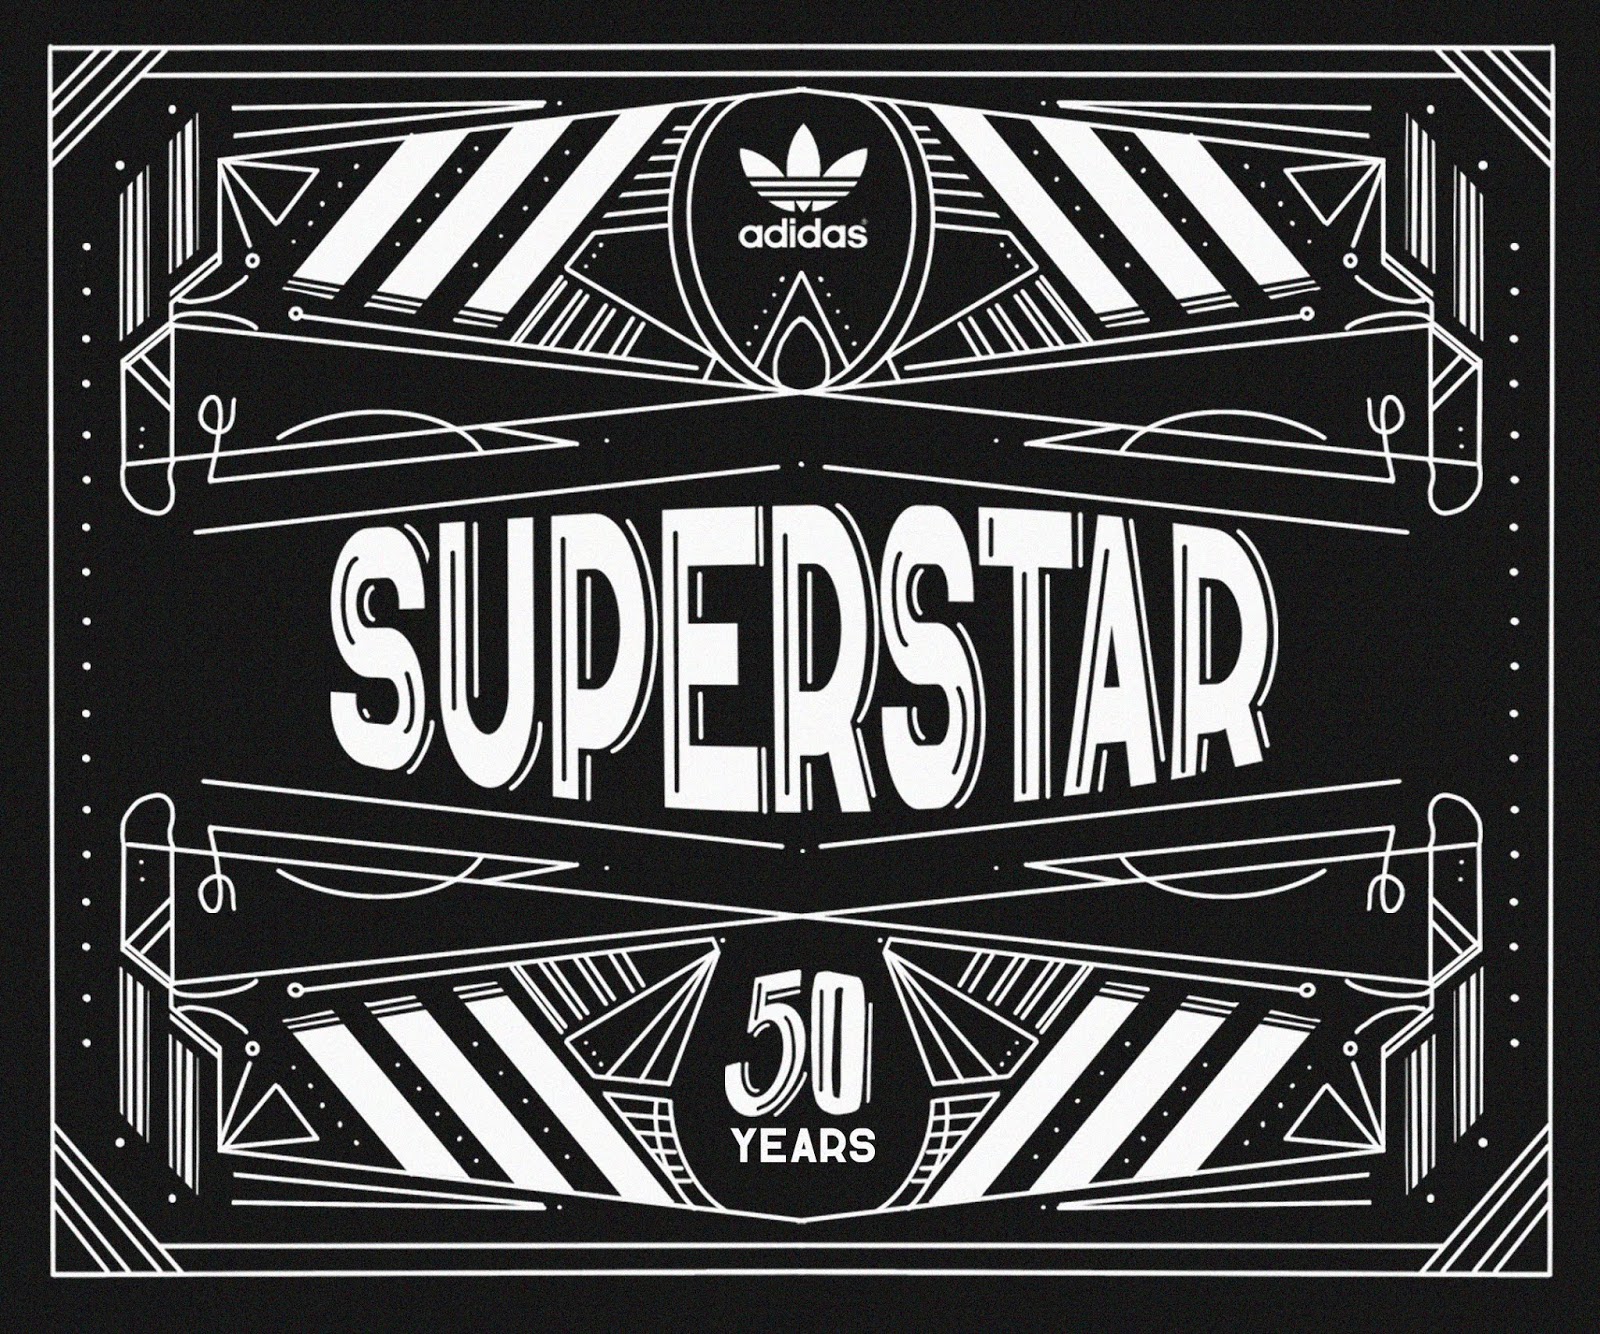 Adidas Superstar 50 Years - Limited Edition Packaging on Packaging ...